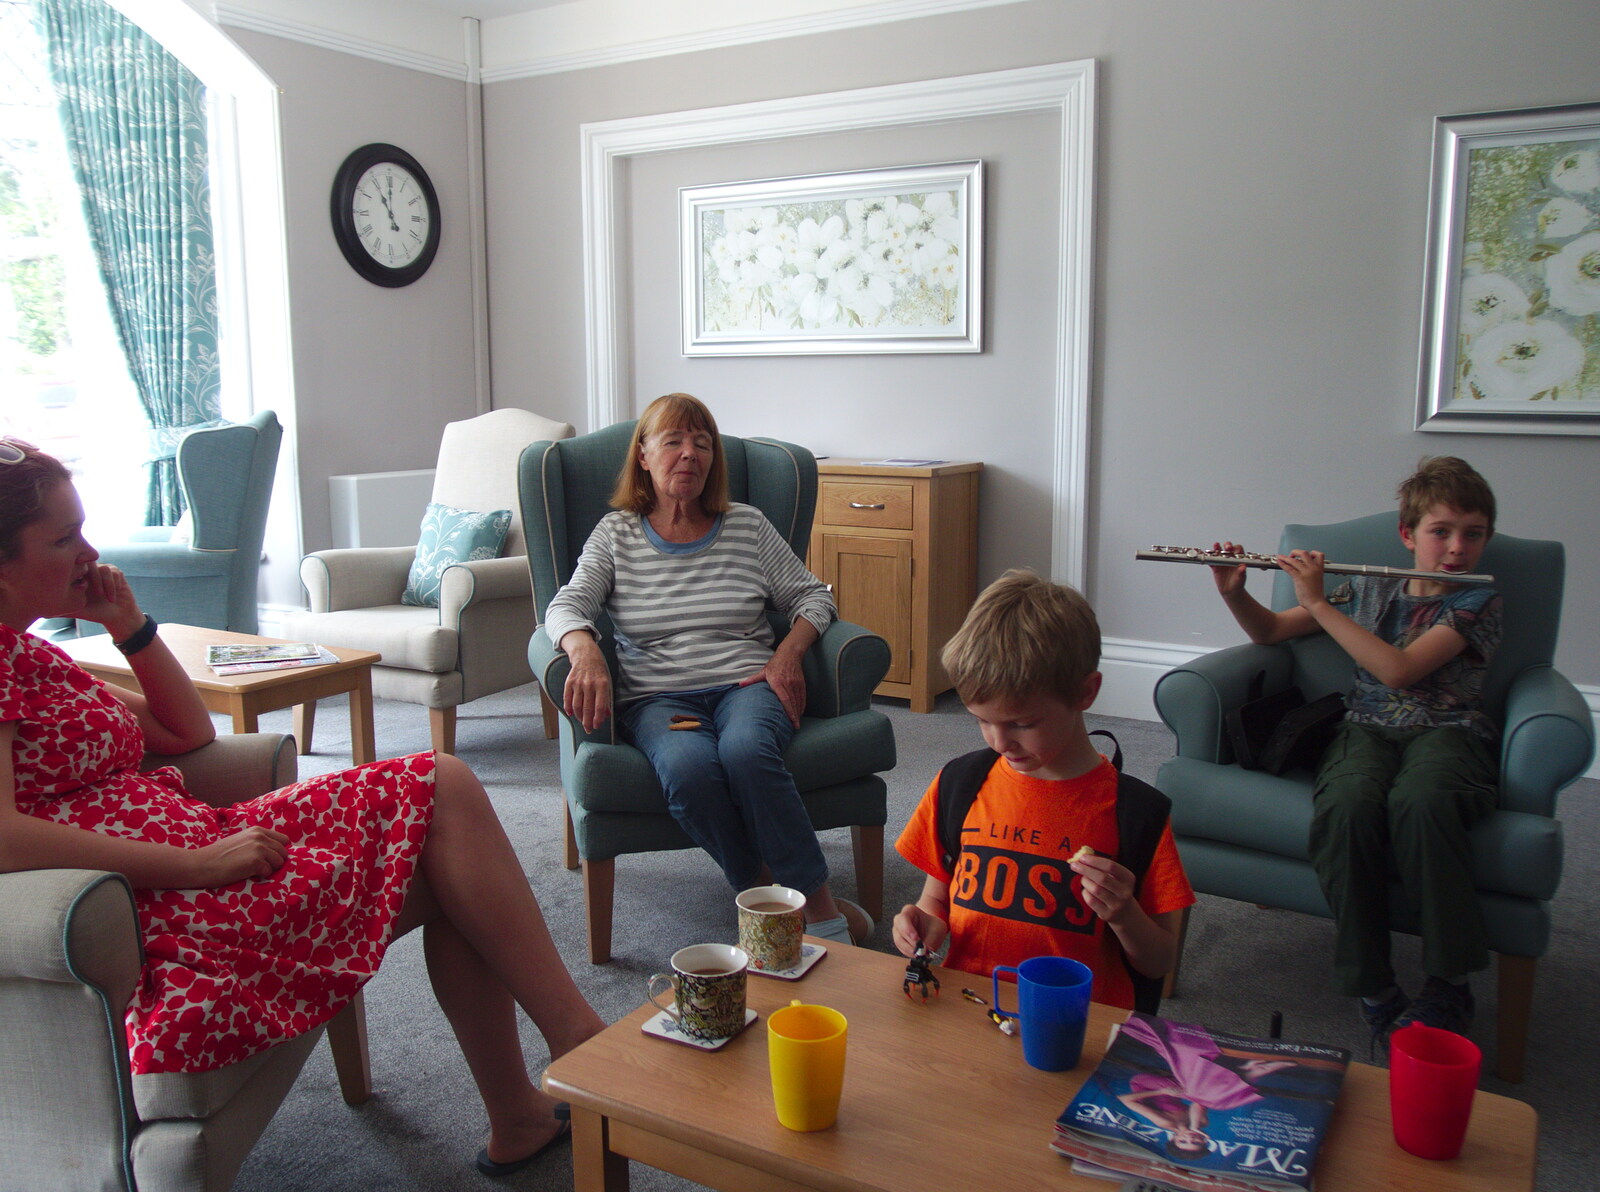 Chagford Lido and a Trip to Parke, Bovey Tracey, Devon - 25th May 2019: Fred plays some flute for Grandma J